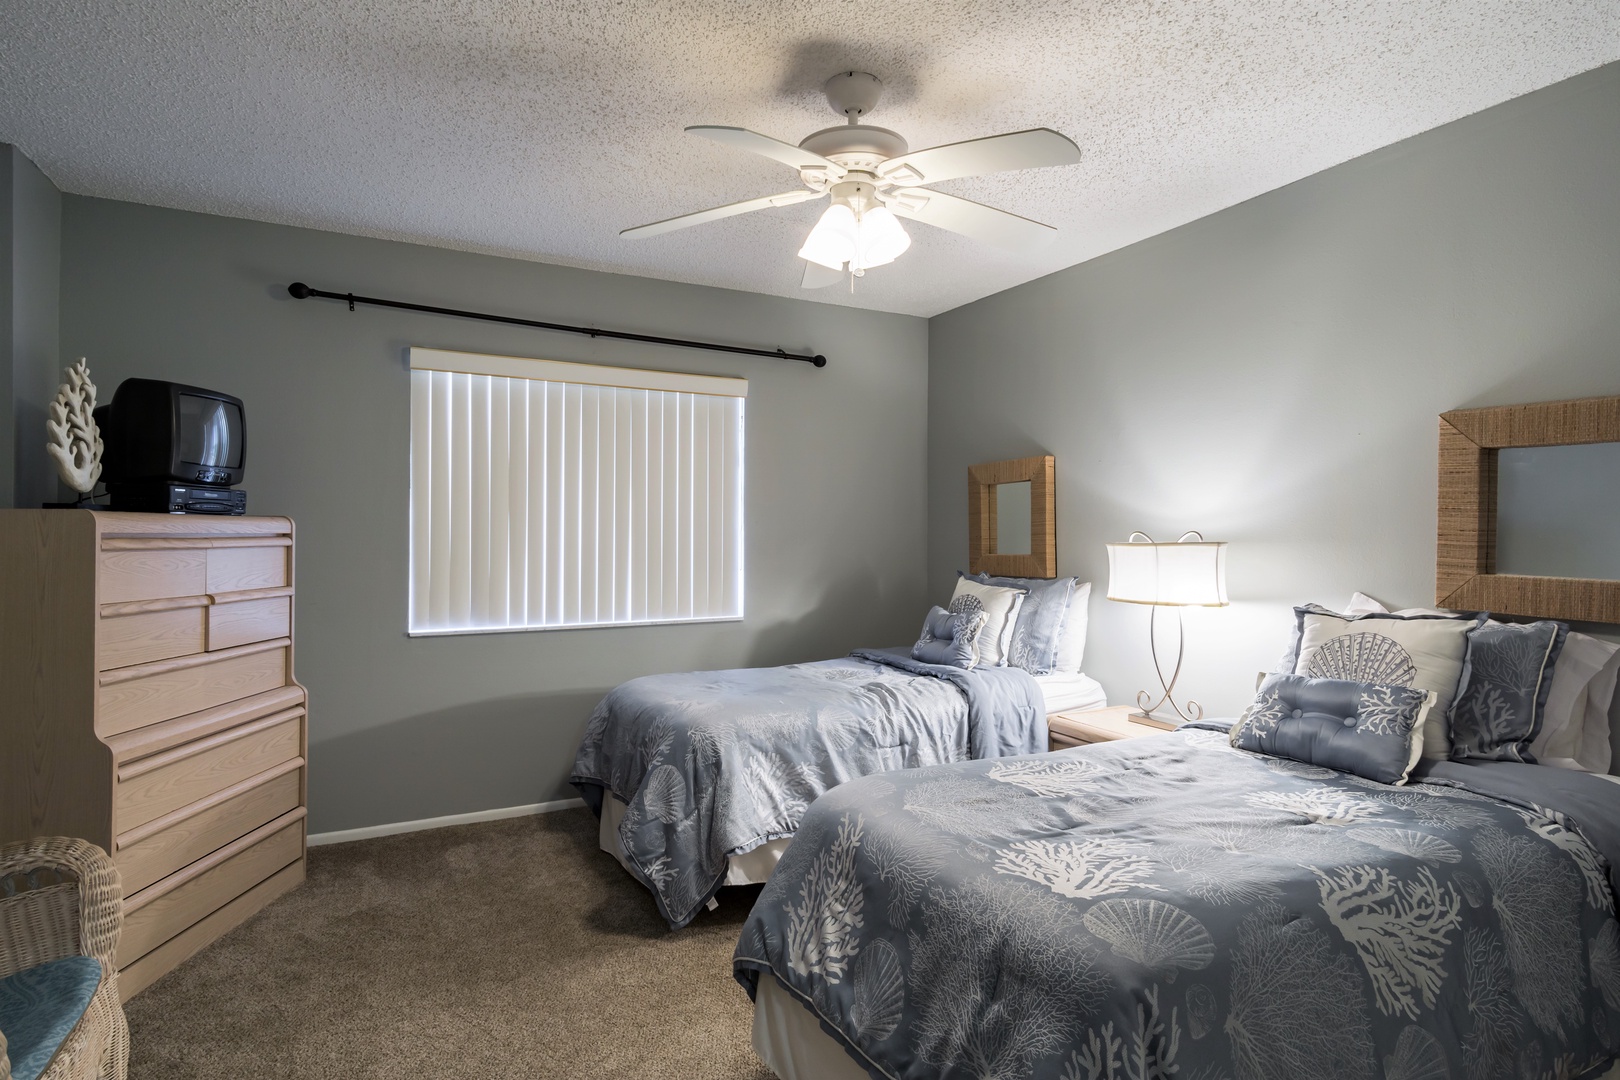 The Second Bedroom has two twin beds, a ceiling fan, and a Roku smart TV.